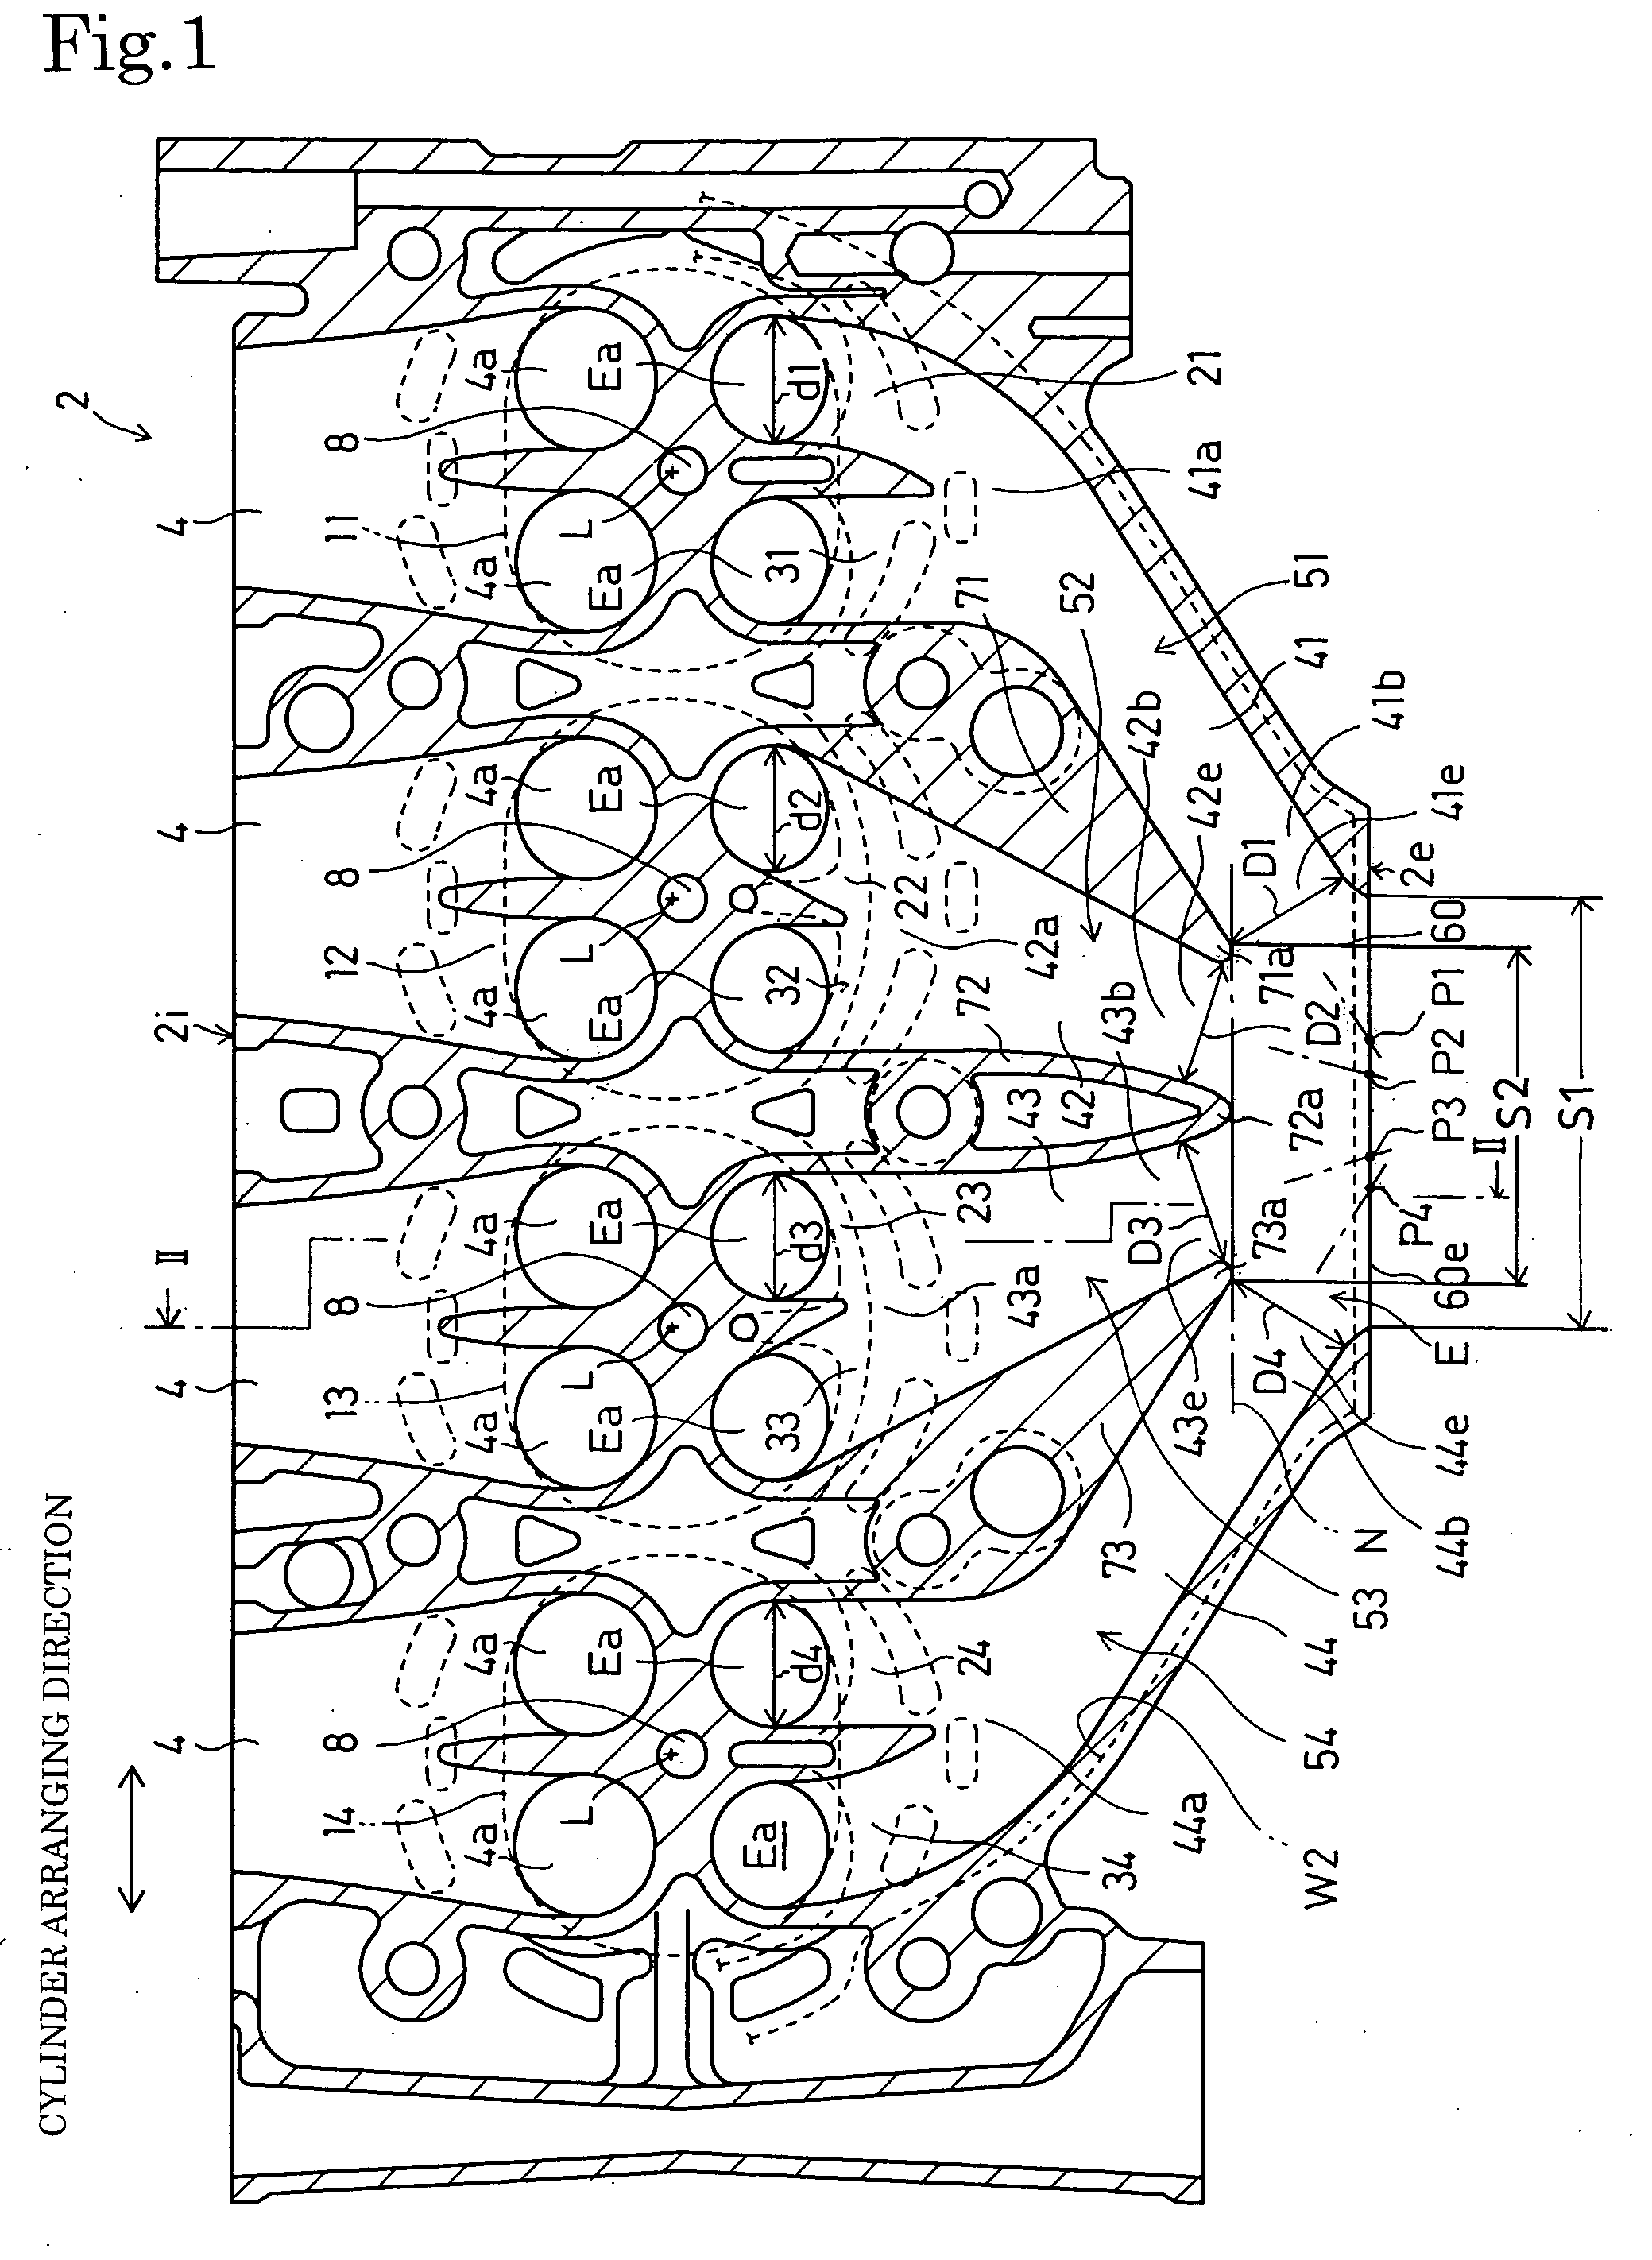 Multiple-cylinder internal combustion engine having cylinder head provided with centralized exhaust passageway